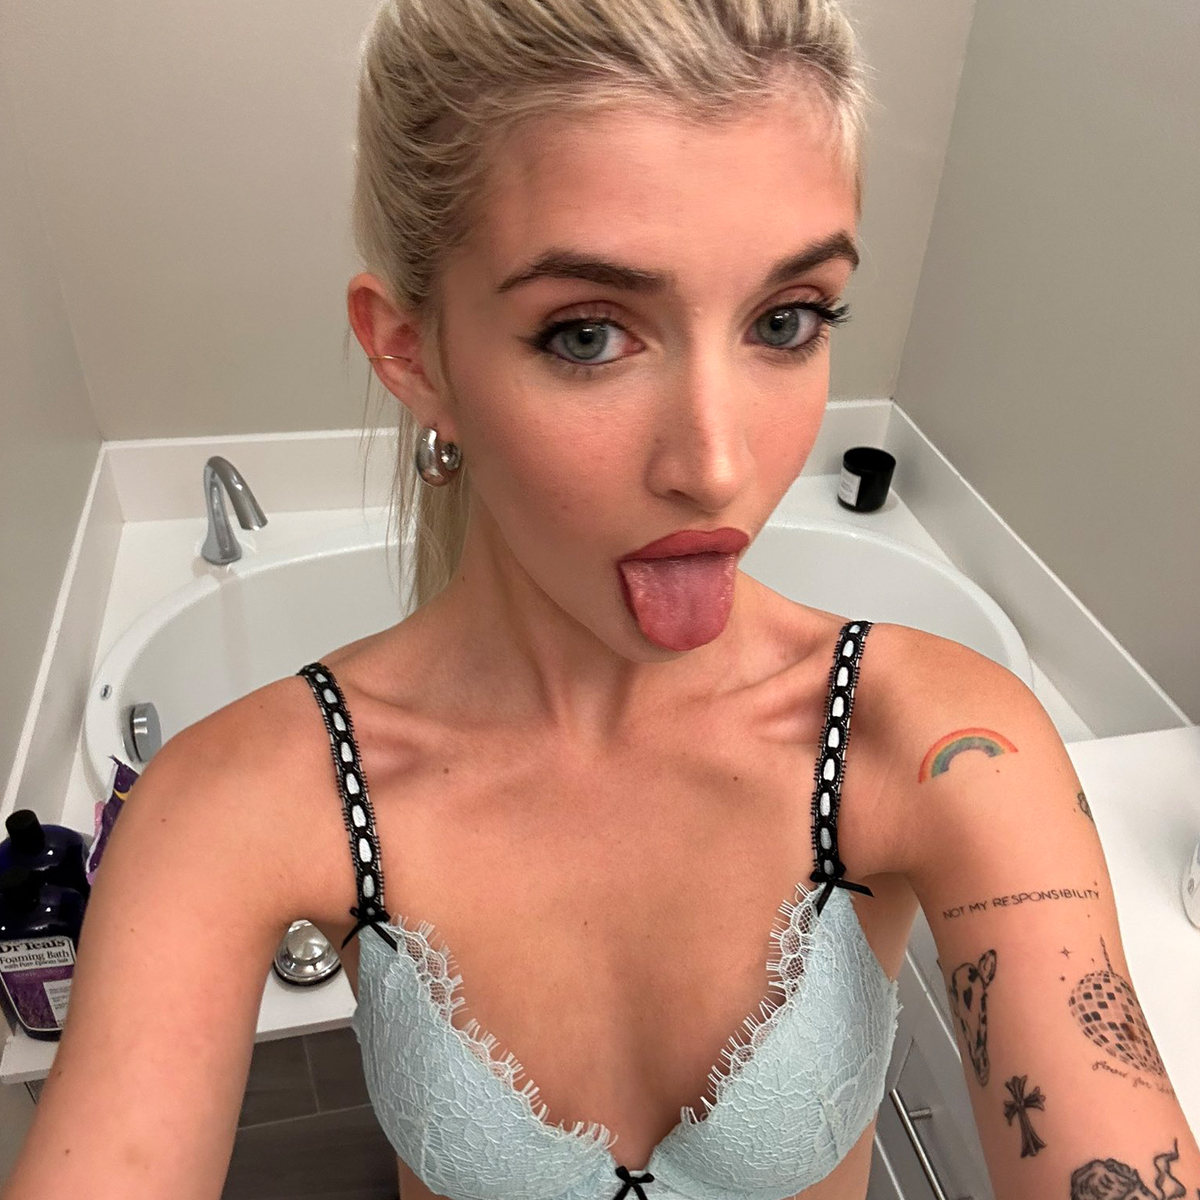 Charlie Sheen’s Daughter Sami Shares Her “Riskiest” OnlyFans Pic Yet